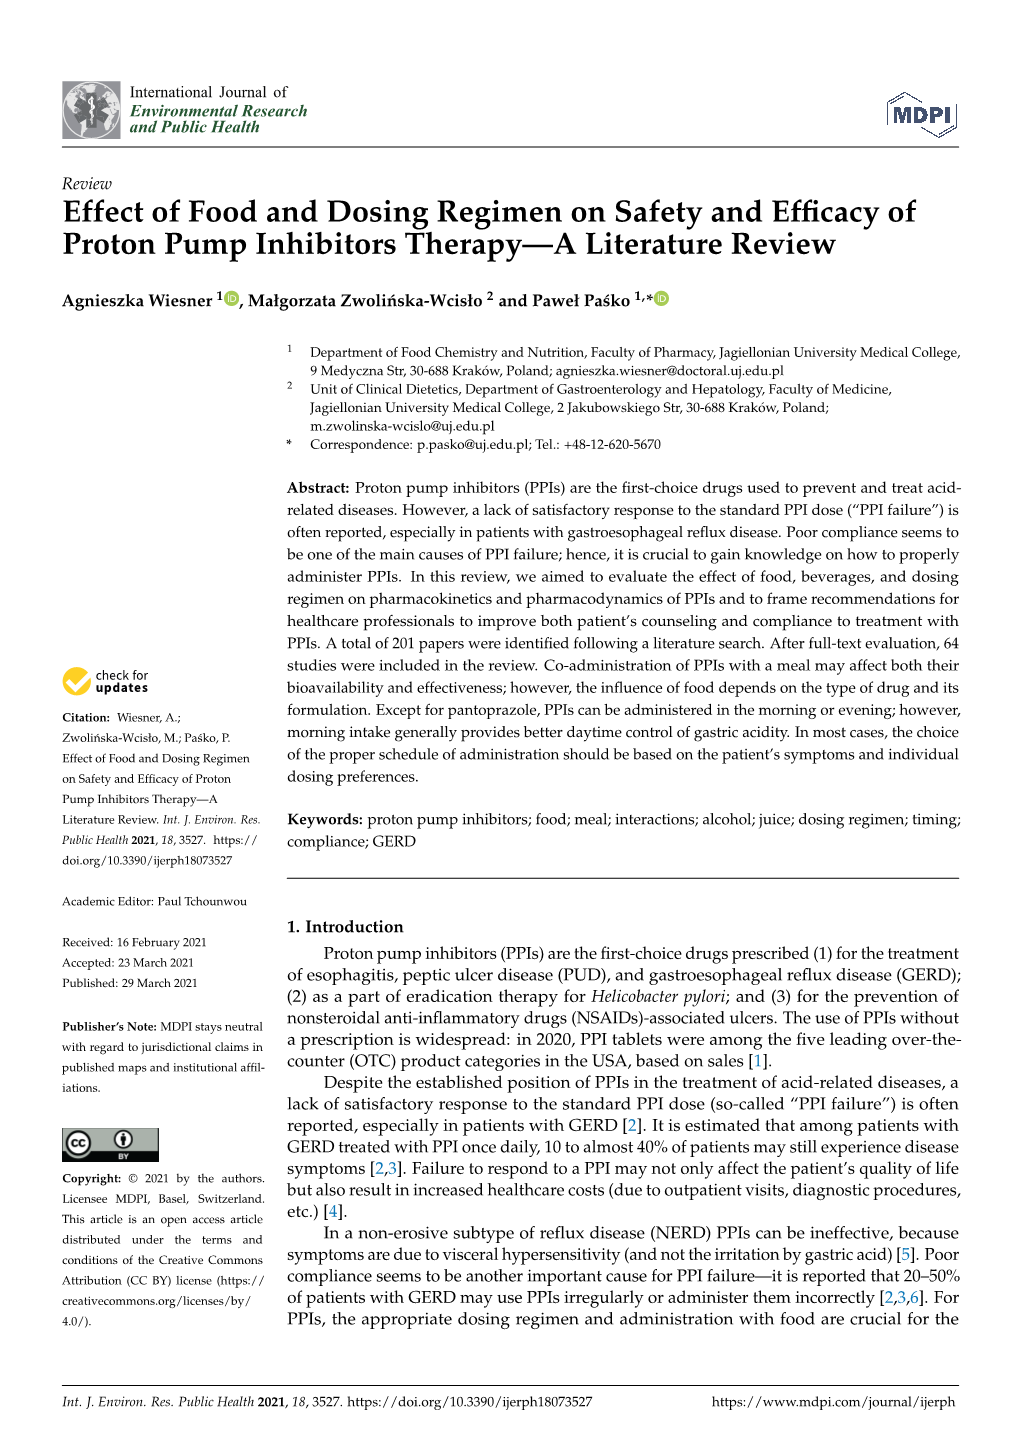 Effect of Food and Dosing Regimen on Safety and Efficacy of Proton